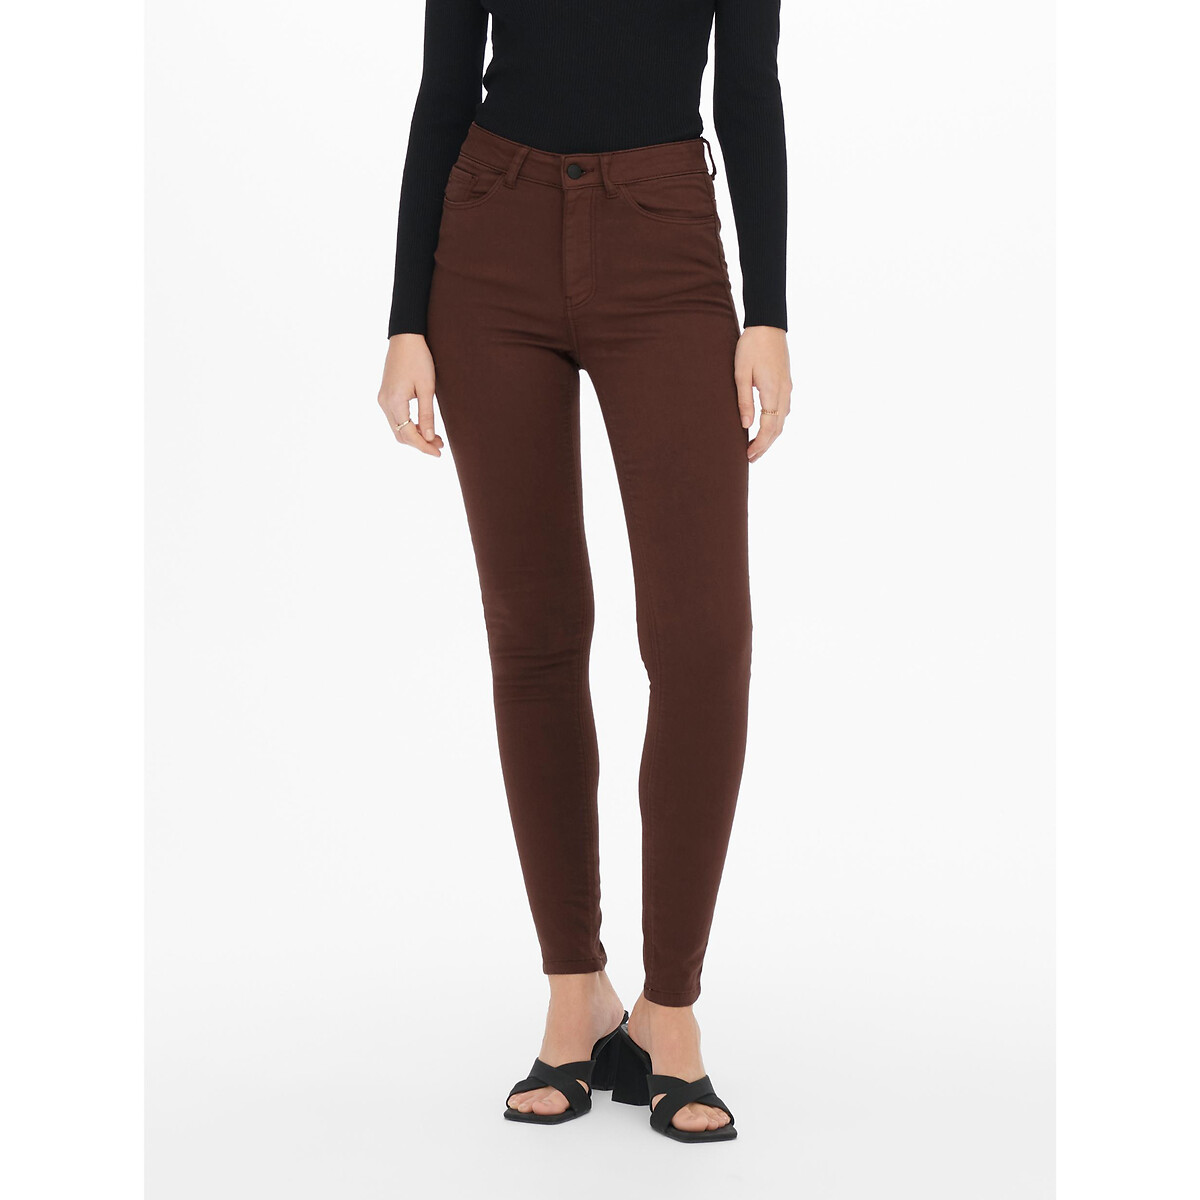 Cotton mix skinny trousers with high waist, brown, Jdy | La Redoute